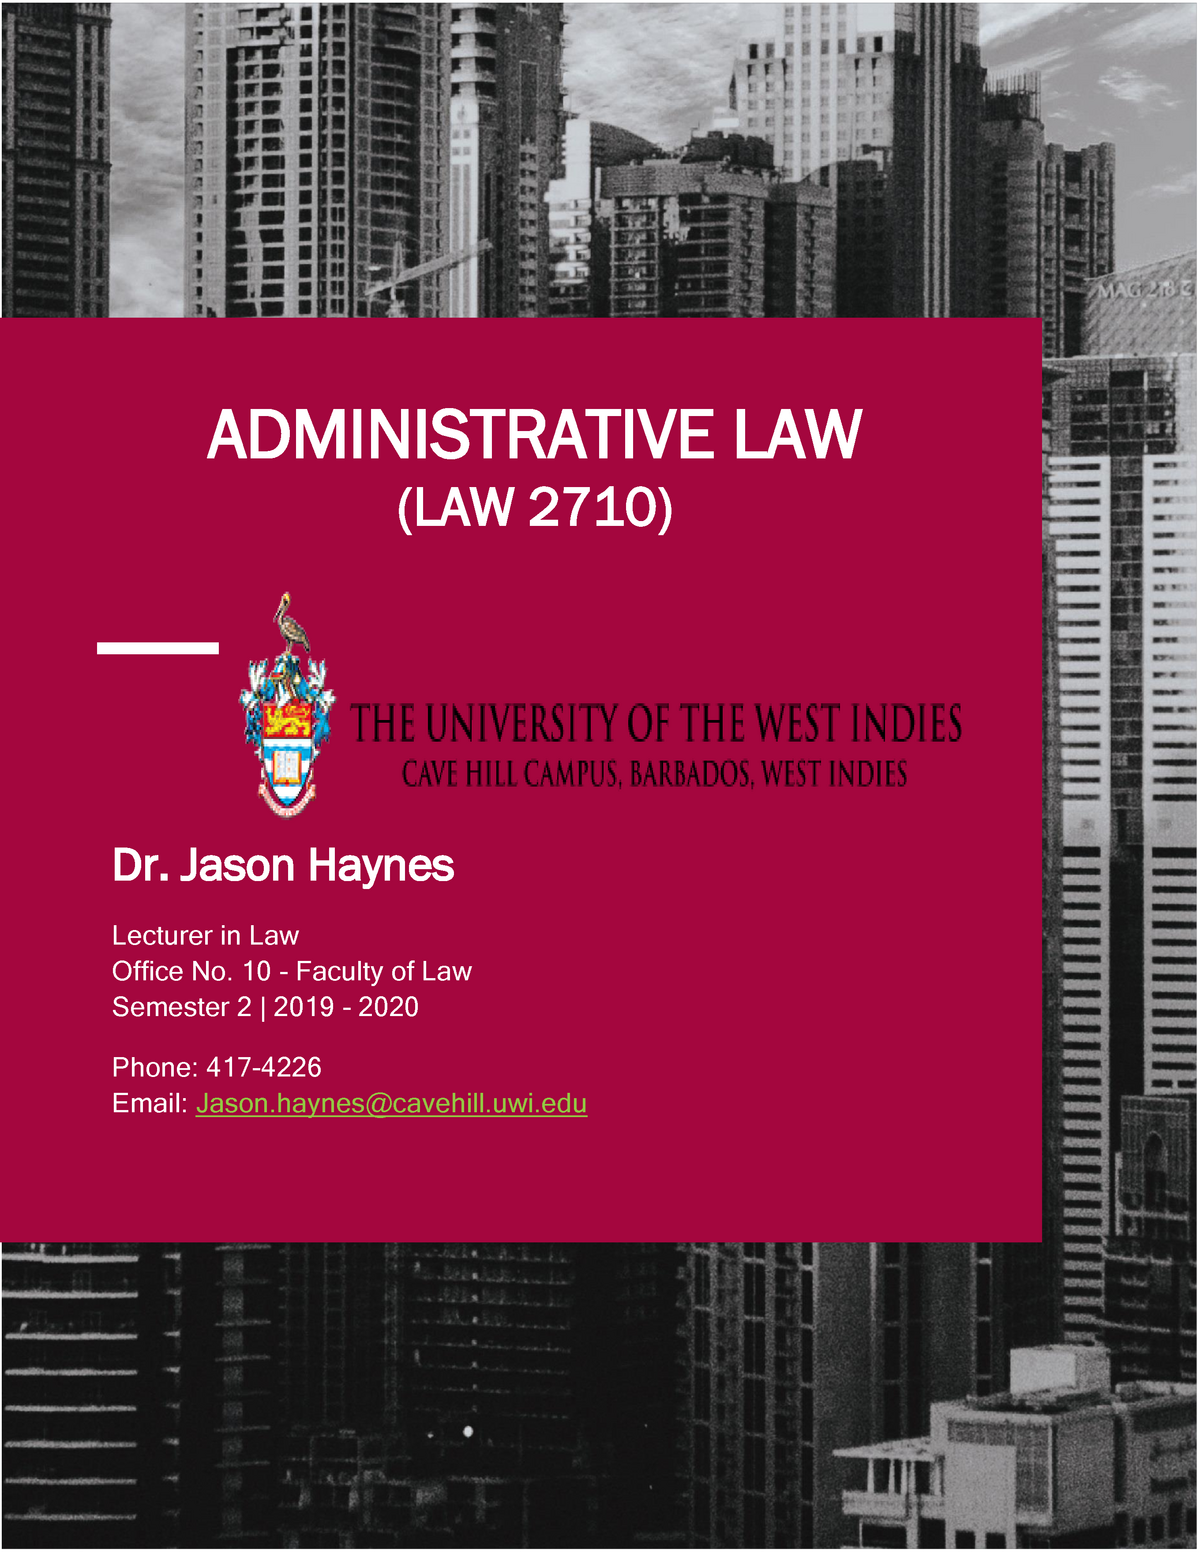 worksheet-1-2-lecture-notes-1-administrative-law-law-271-0-phone-417-4226-email